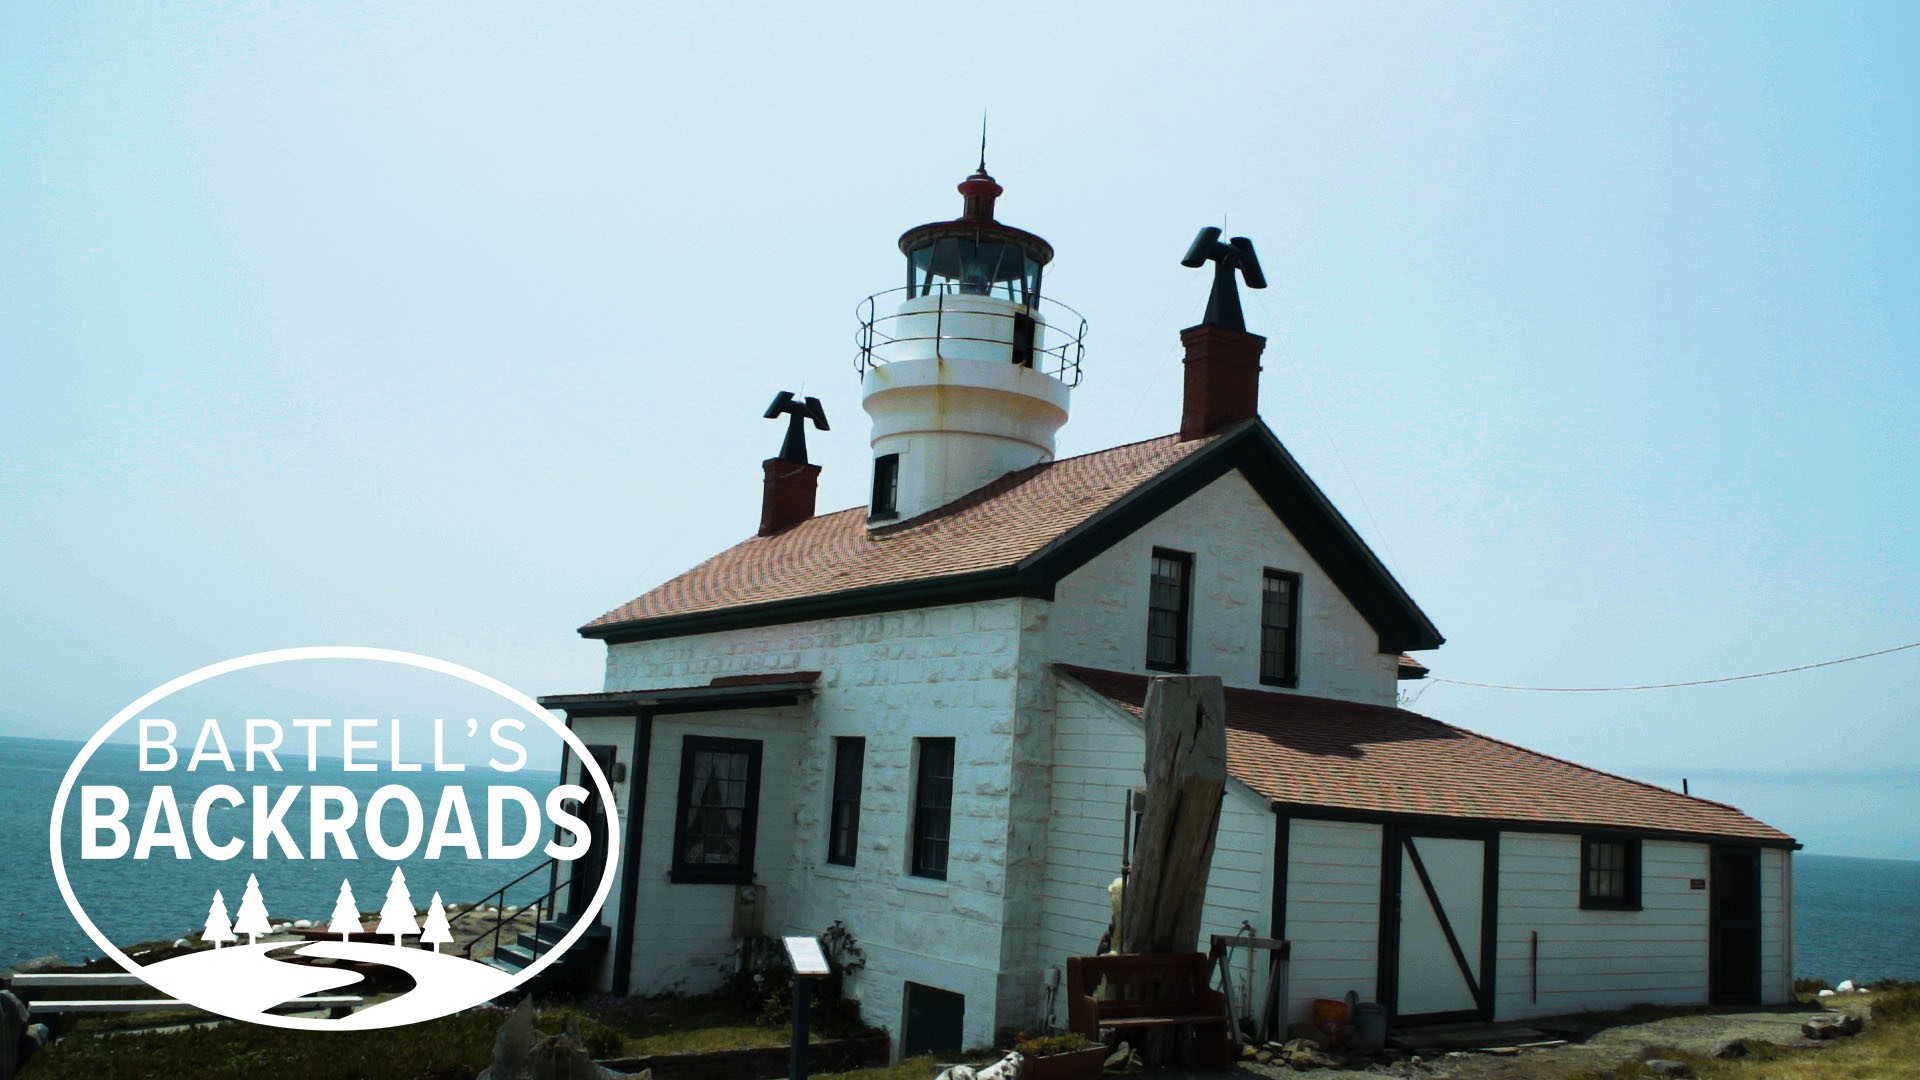 All you have to do is volunteer at Battery Point lighthouse in Crescent City. One lighthouse keeper shares her experience.